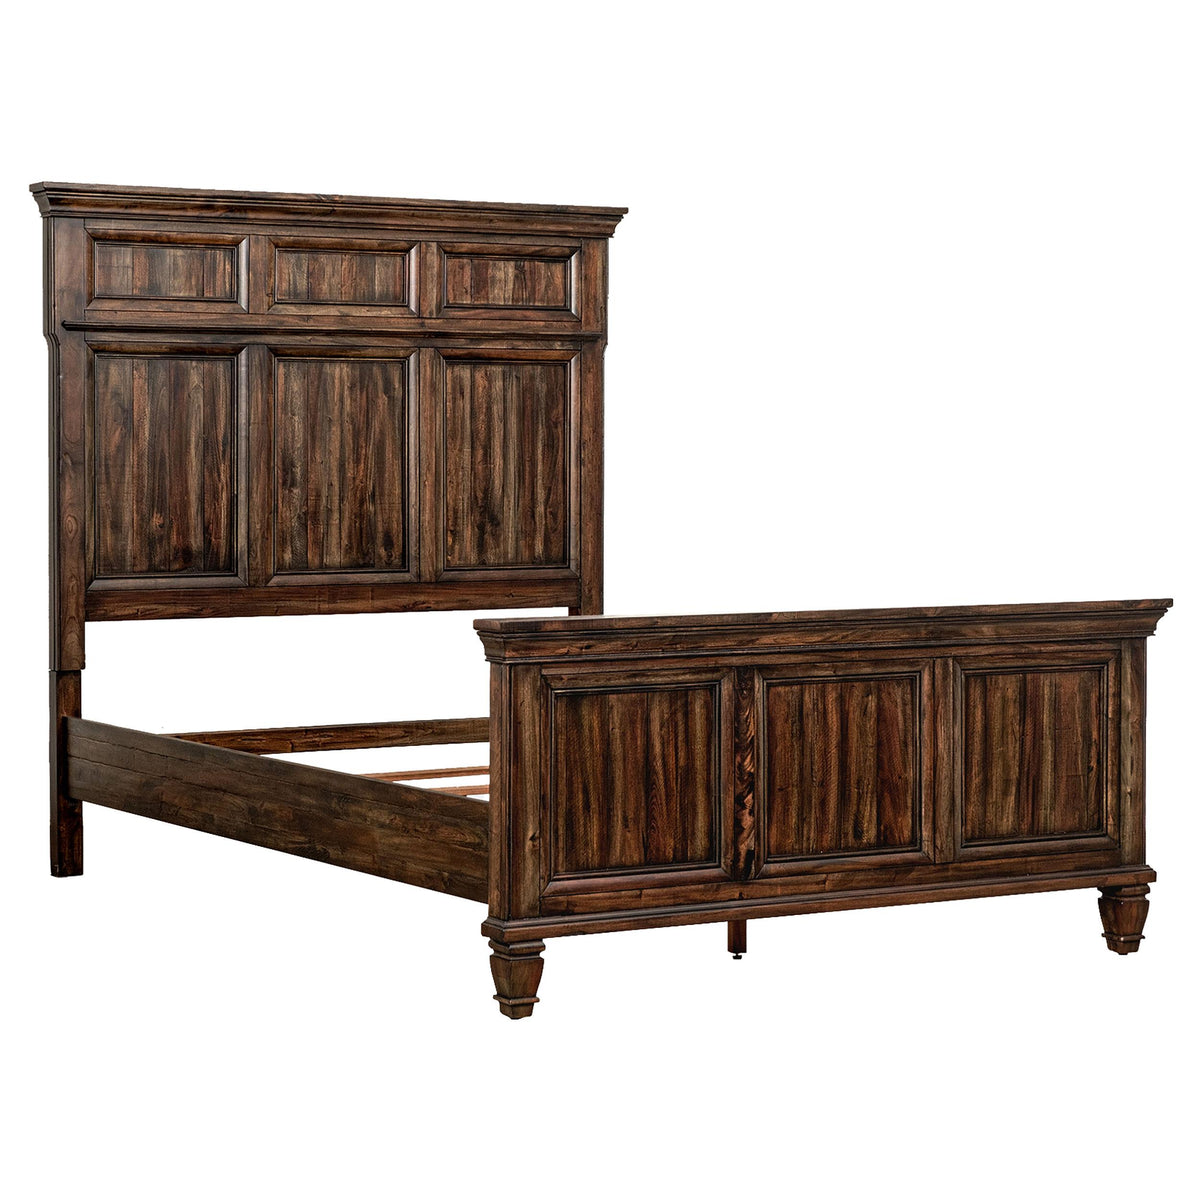 Avenue California King Panel Bed Weathered Burnished Brown Avenue California King Panel Bed Weathered Burnished Brown Half Price Furniture